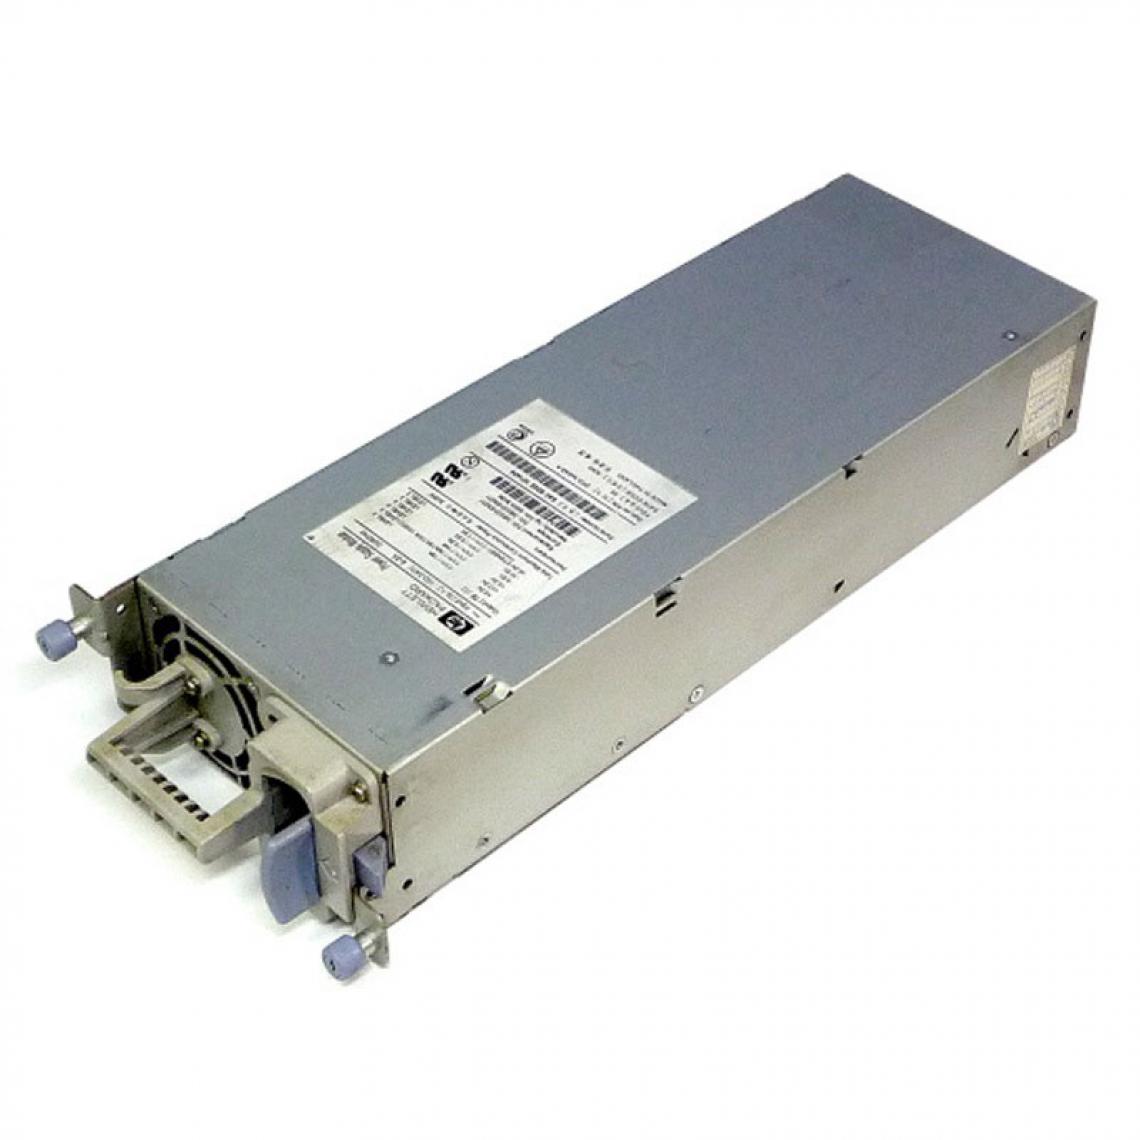 Hp - Alimentation HP DPS-349AB A 349W D8520-63001 100-240V Power Supply - Alimentation modulaire